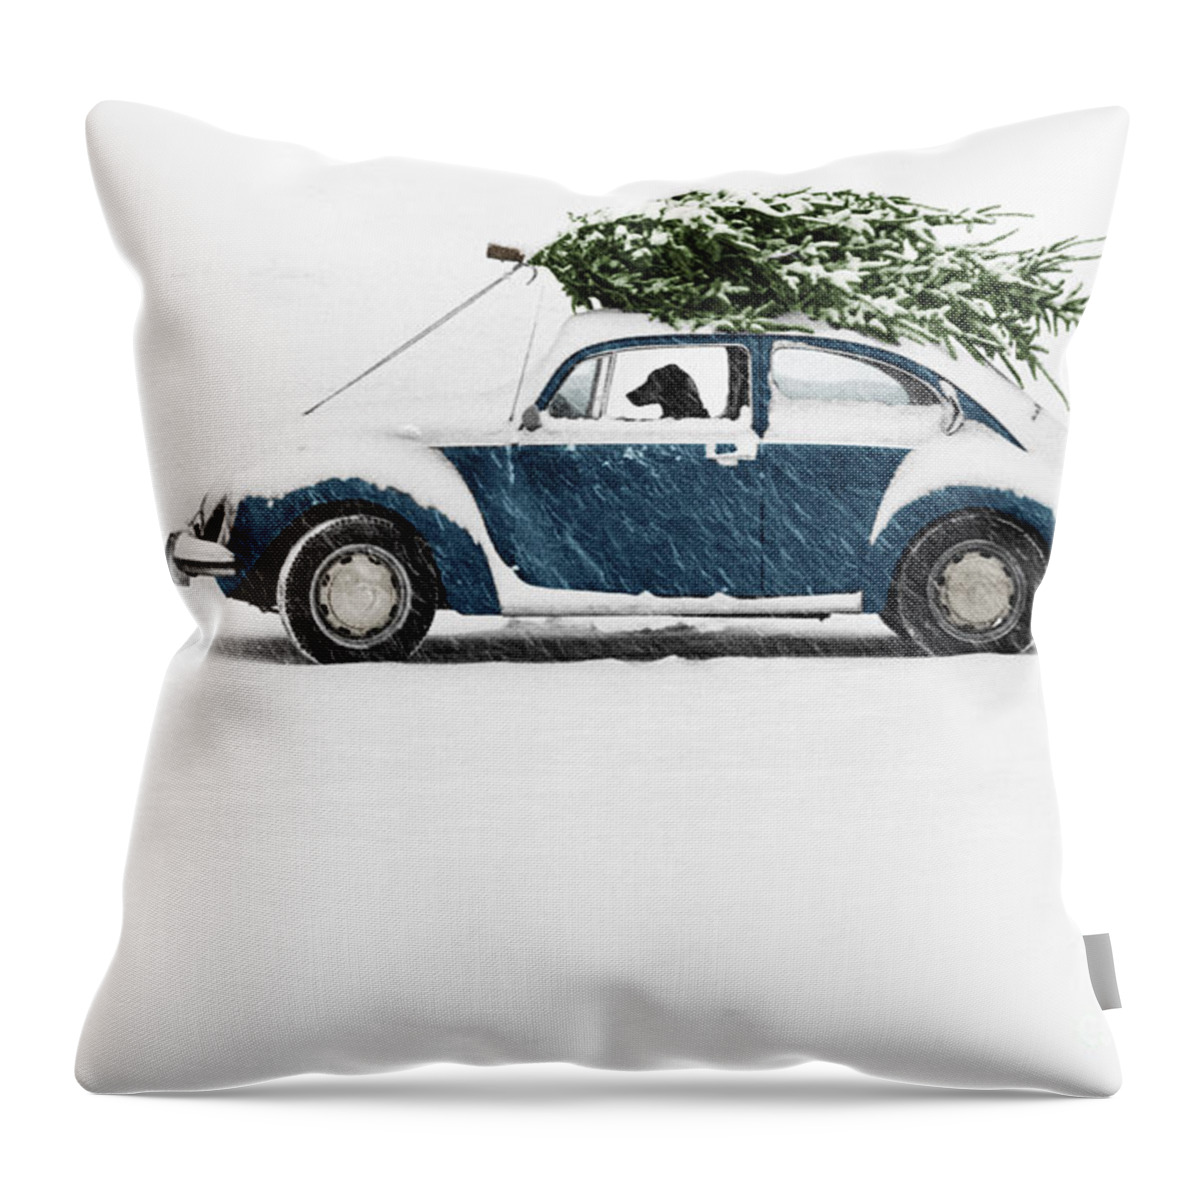 Americana Throw Pillow featuring the photograph Dog in Car with Christmas Tree by Ulrike Welsch